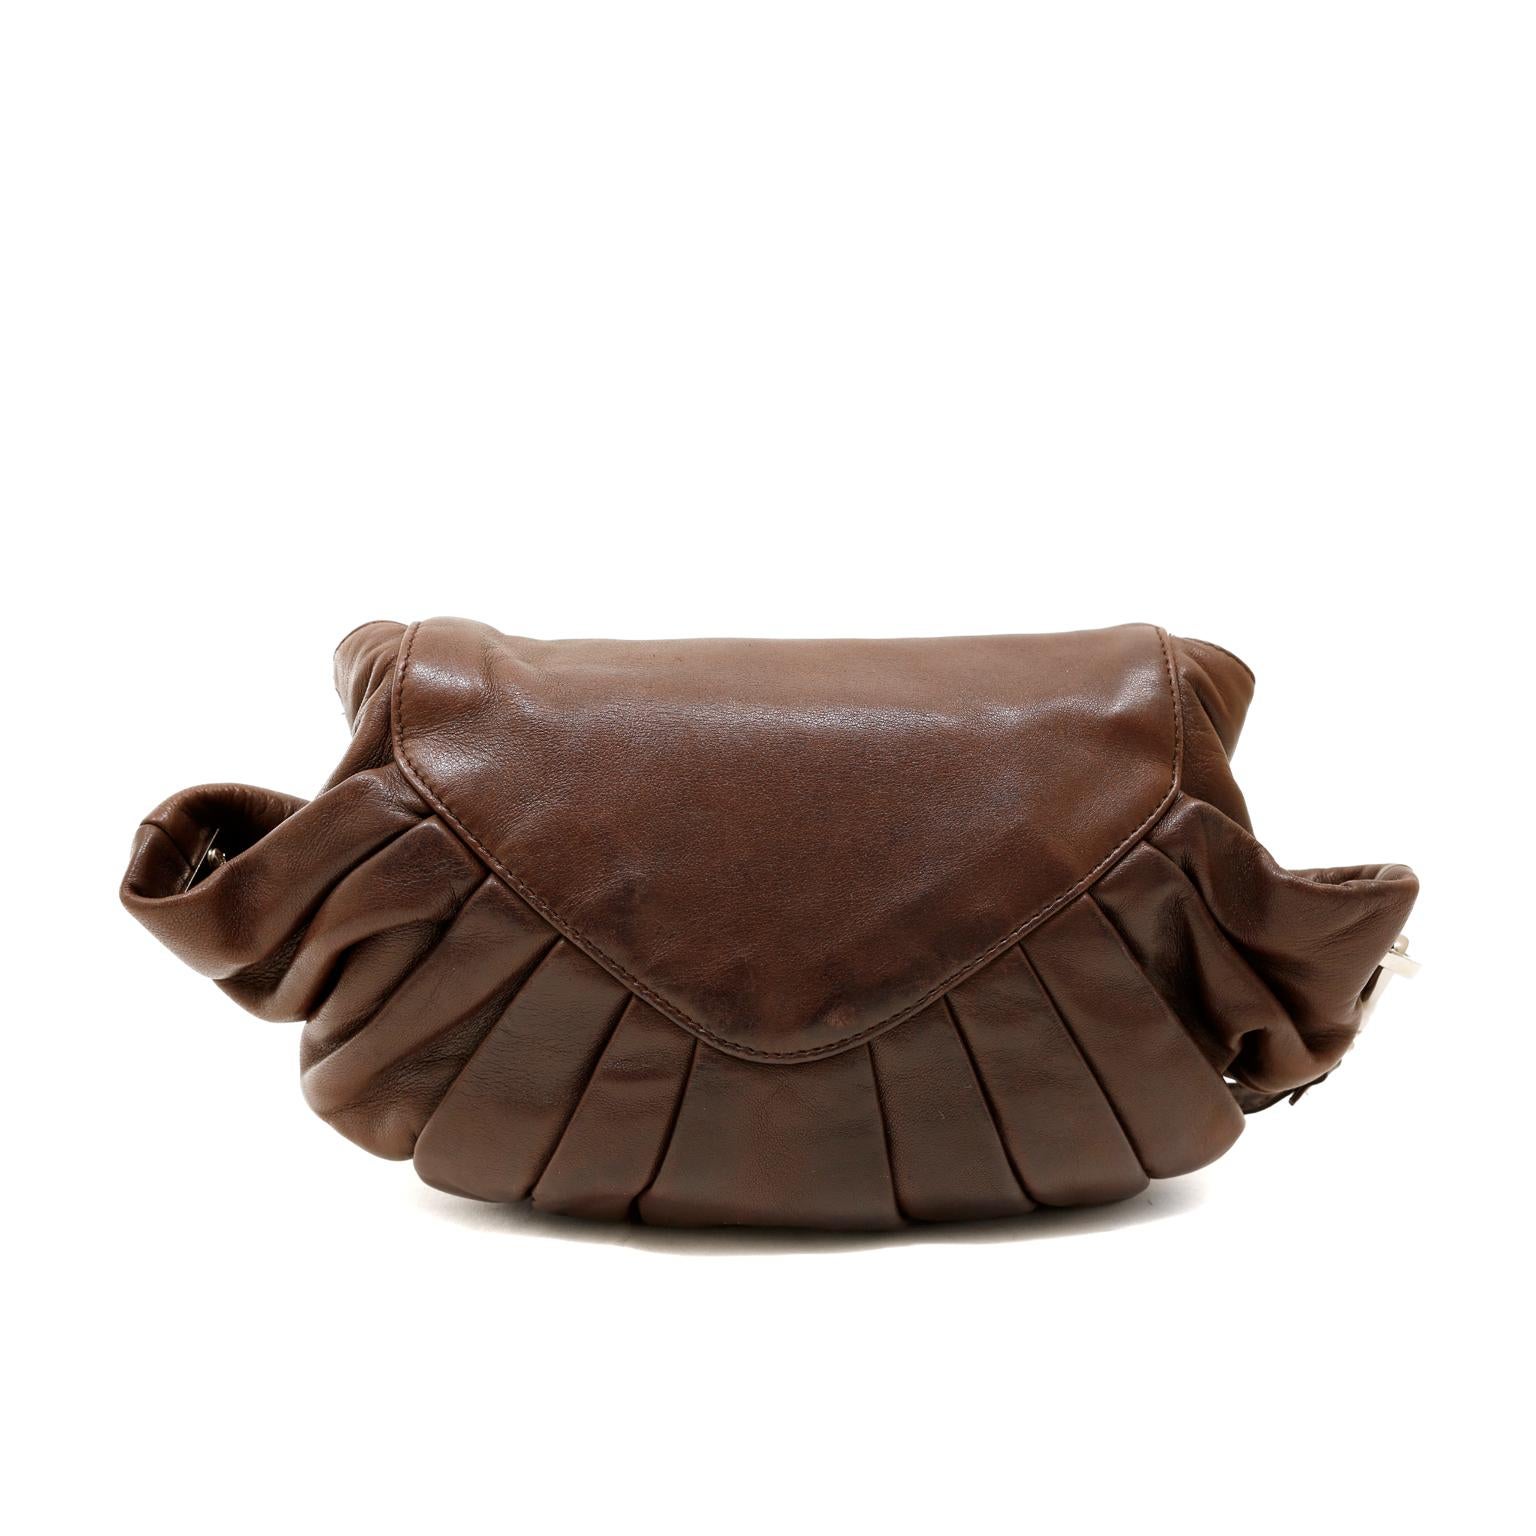 This authentic Chanel Brown Pleated Lambskin Flap Bag is in very good condition.  The unique silhouette and gathered details make this Chanel a standout piece in any collection.  
Rich brown lambskin bag has a rounded bottom with pleated folds. 